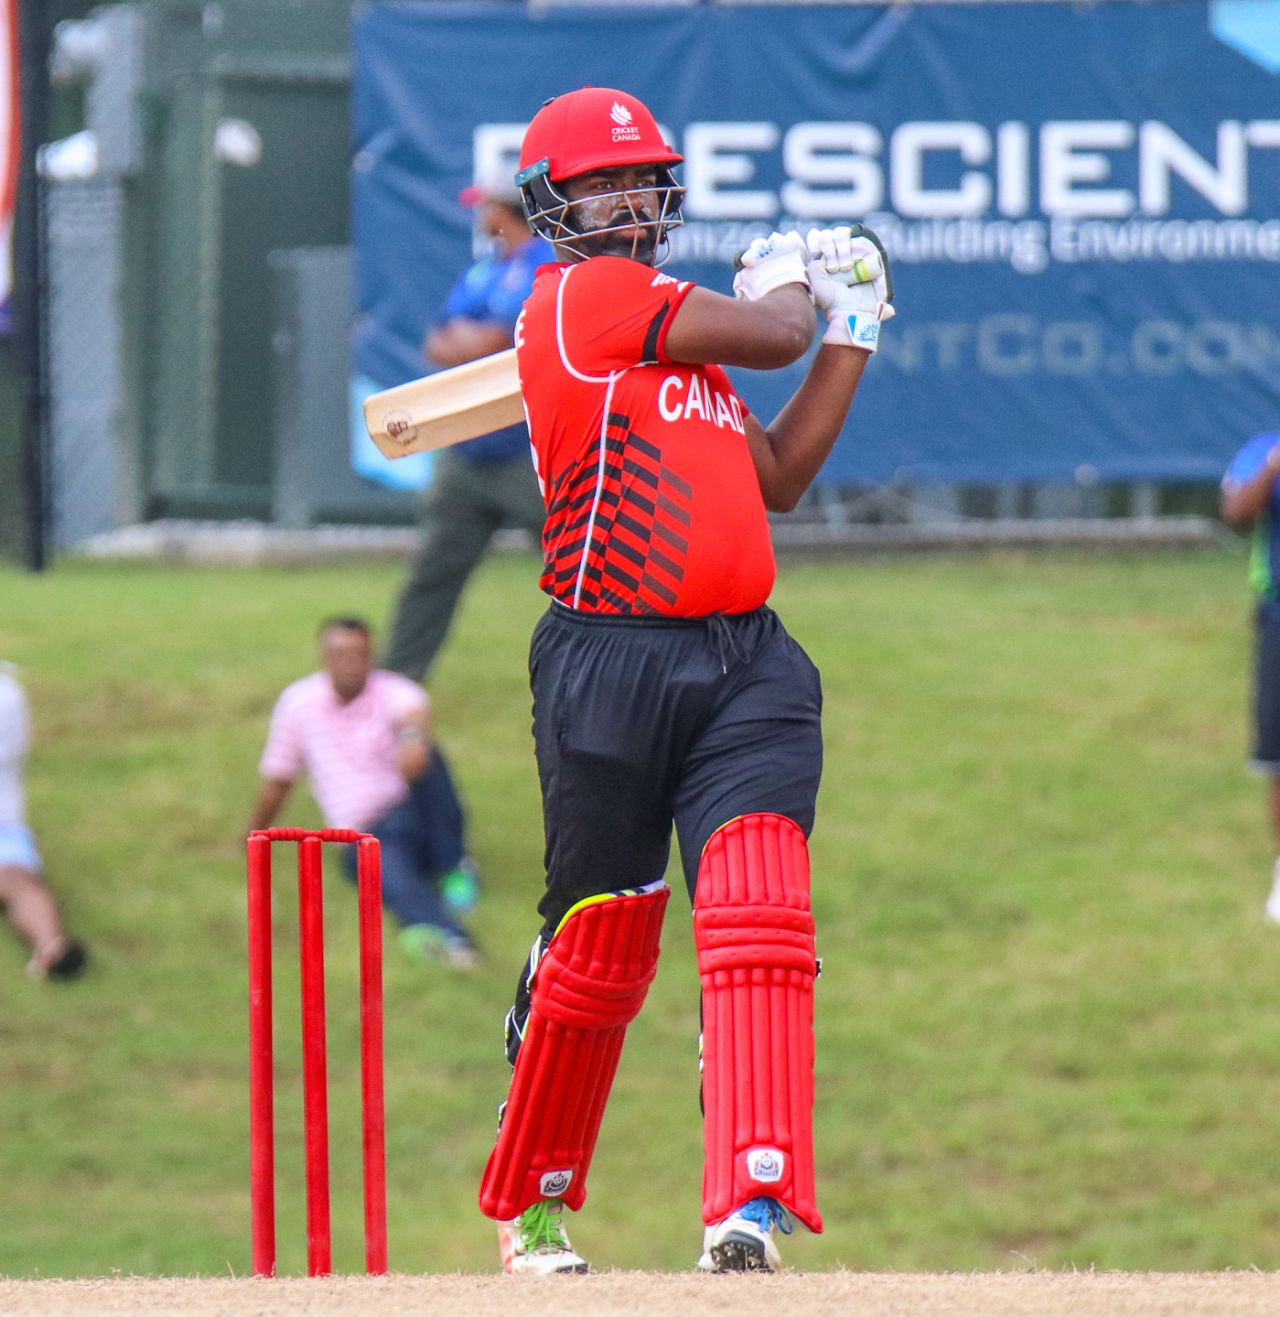 Srimantha Wijeyeratne powers a pull over mid-on for a boundary, Belize v Canada, ICC World Twenty20 Americas Sub Regional Qualifier A, Morrisville, September 20, 2018